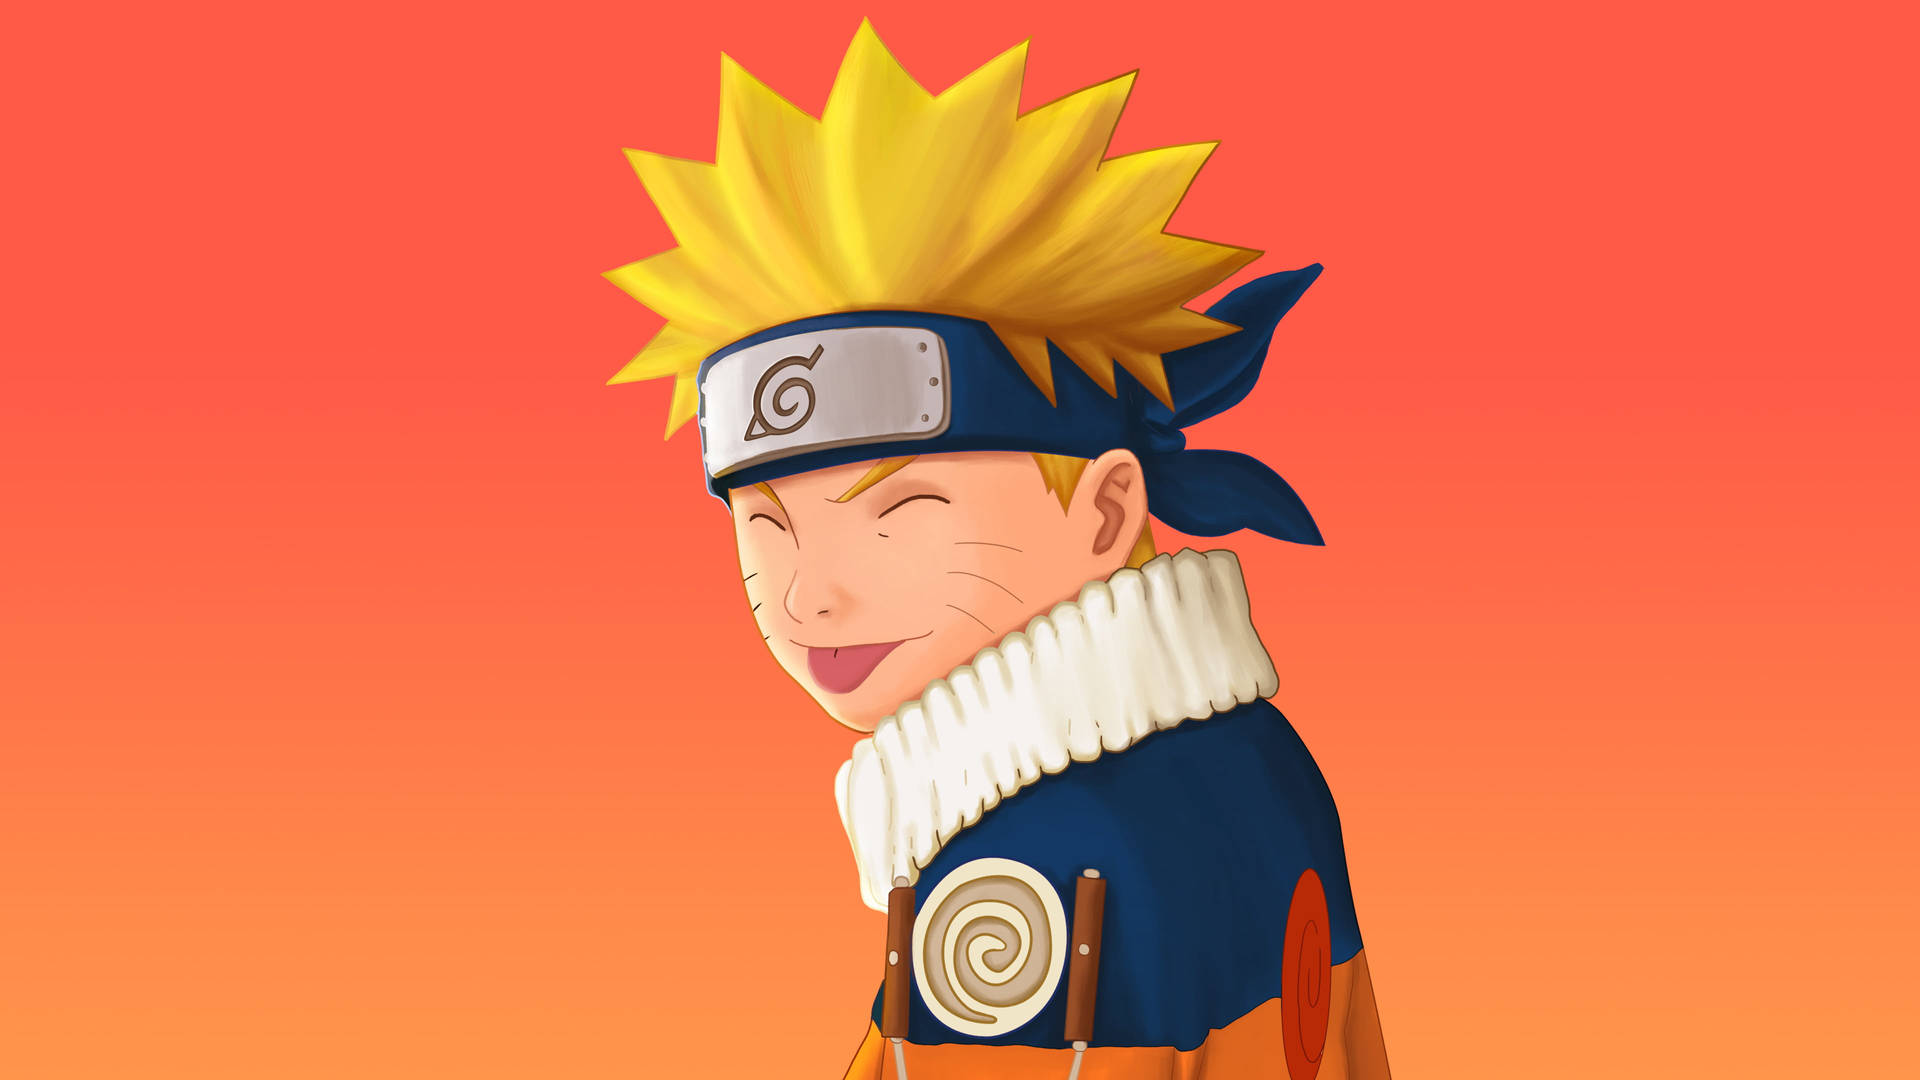 Moving Naruto Funny Art Background